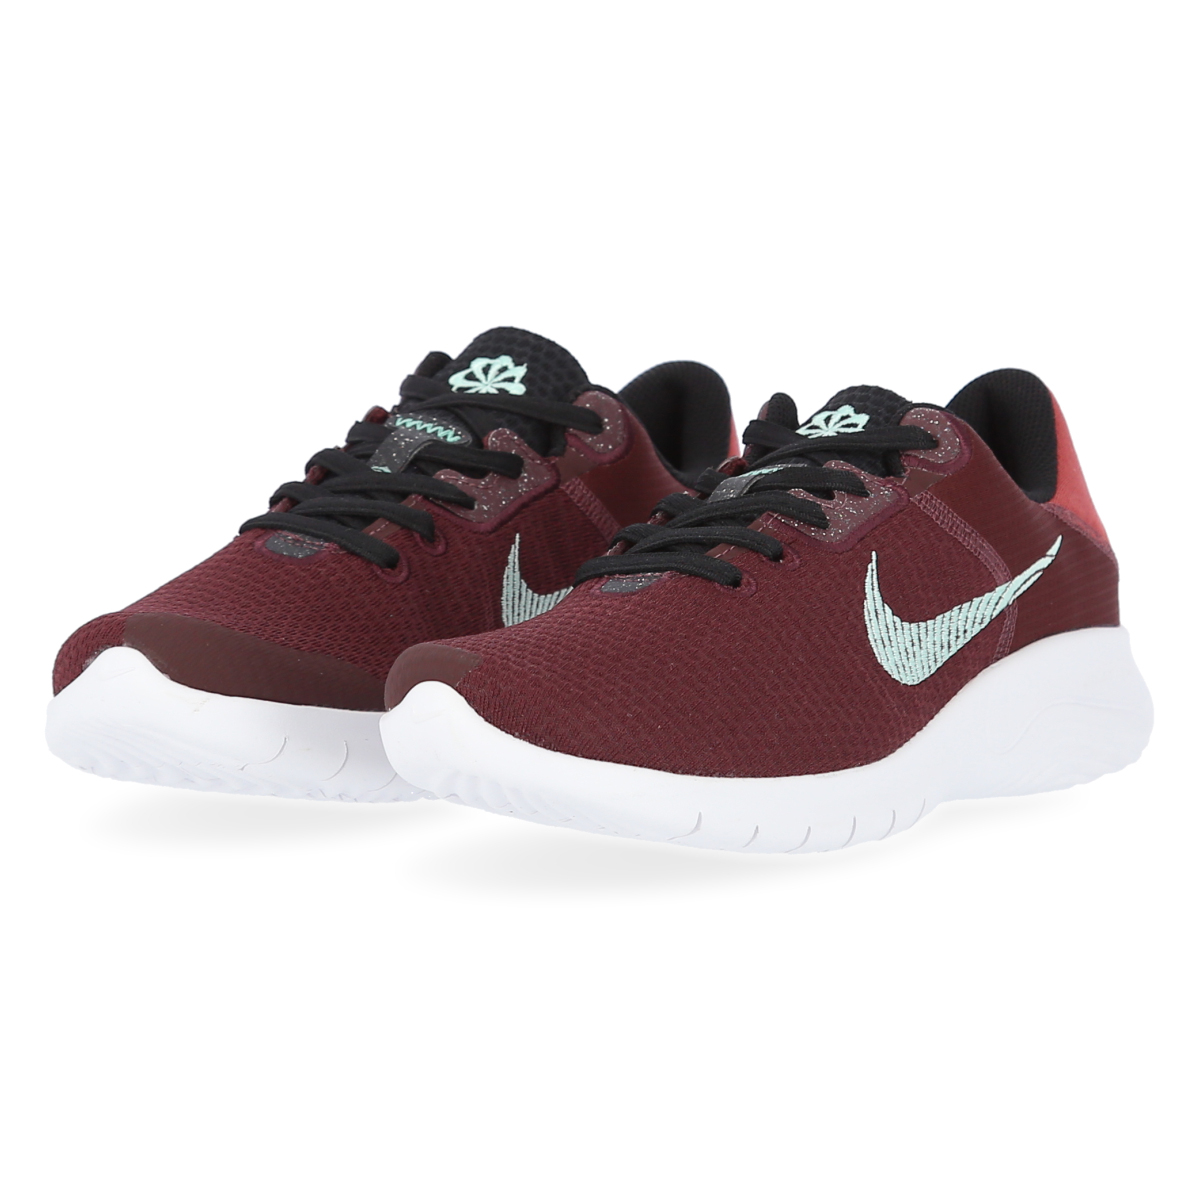 Zapatillas Running Nike Flex Experience Rn 11 Nn Mujer,  image number null